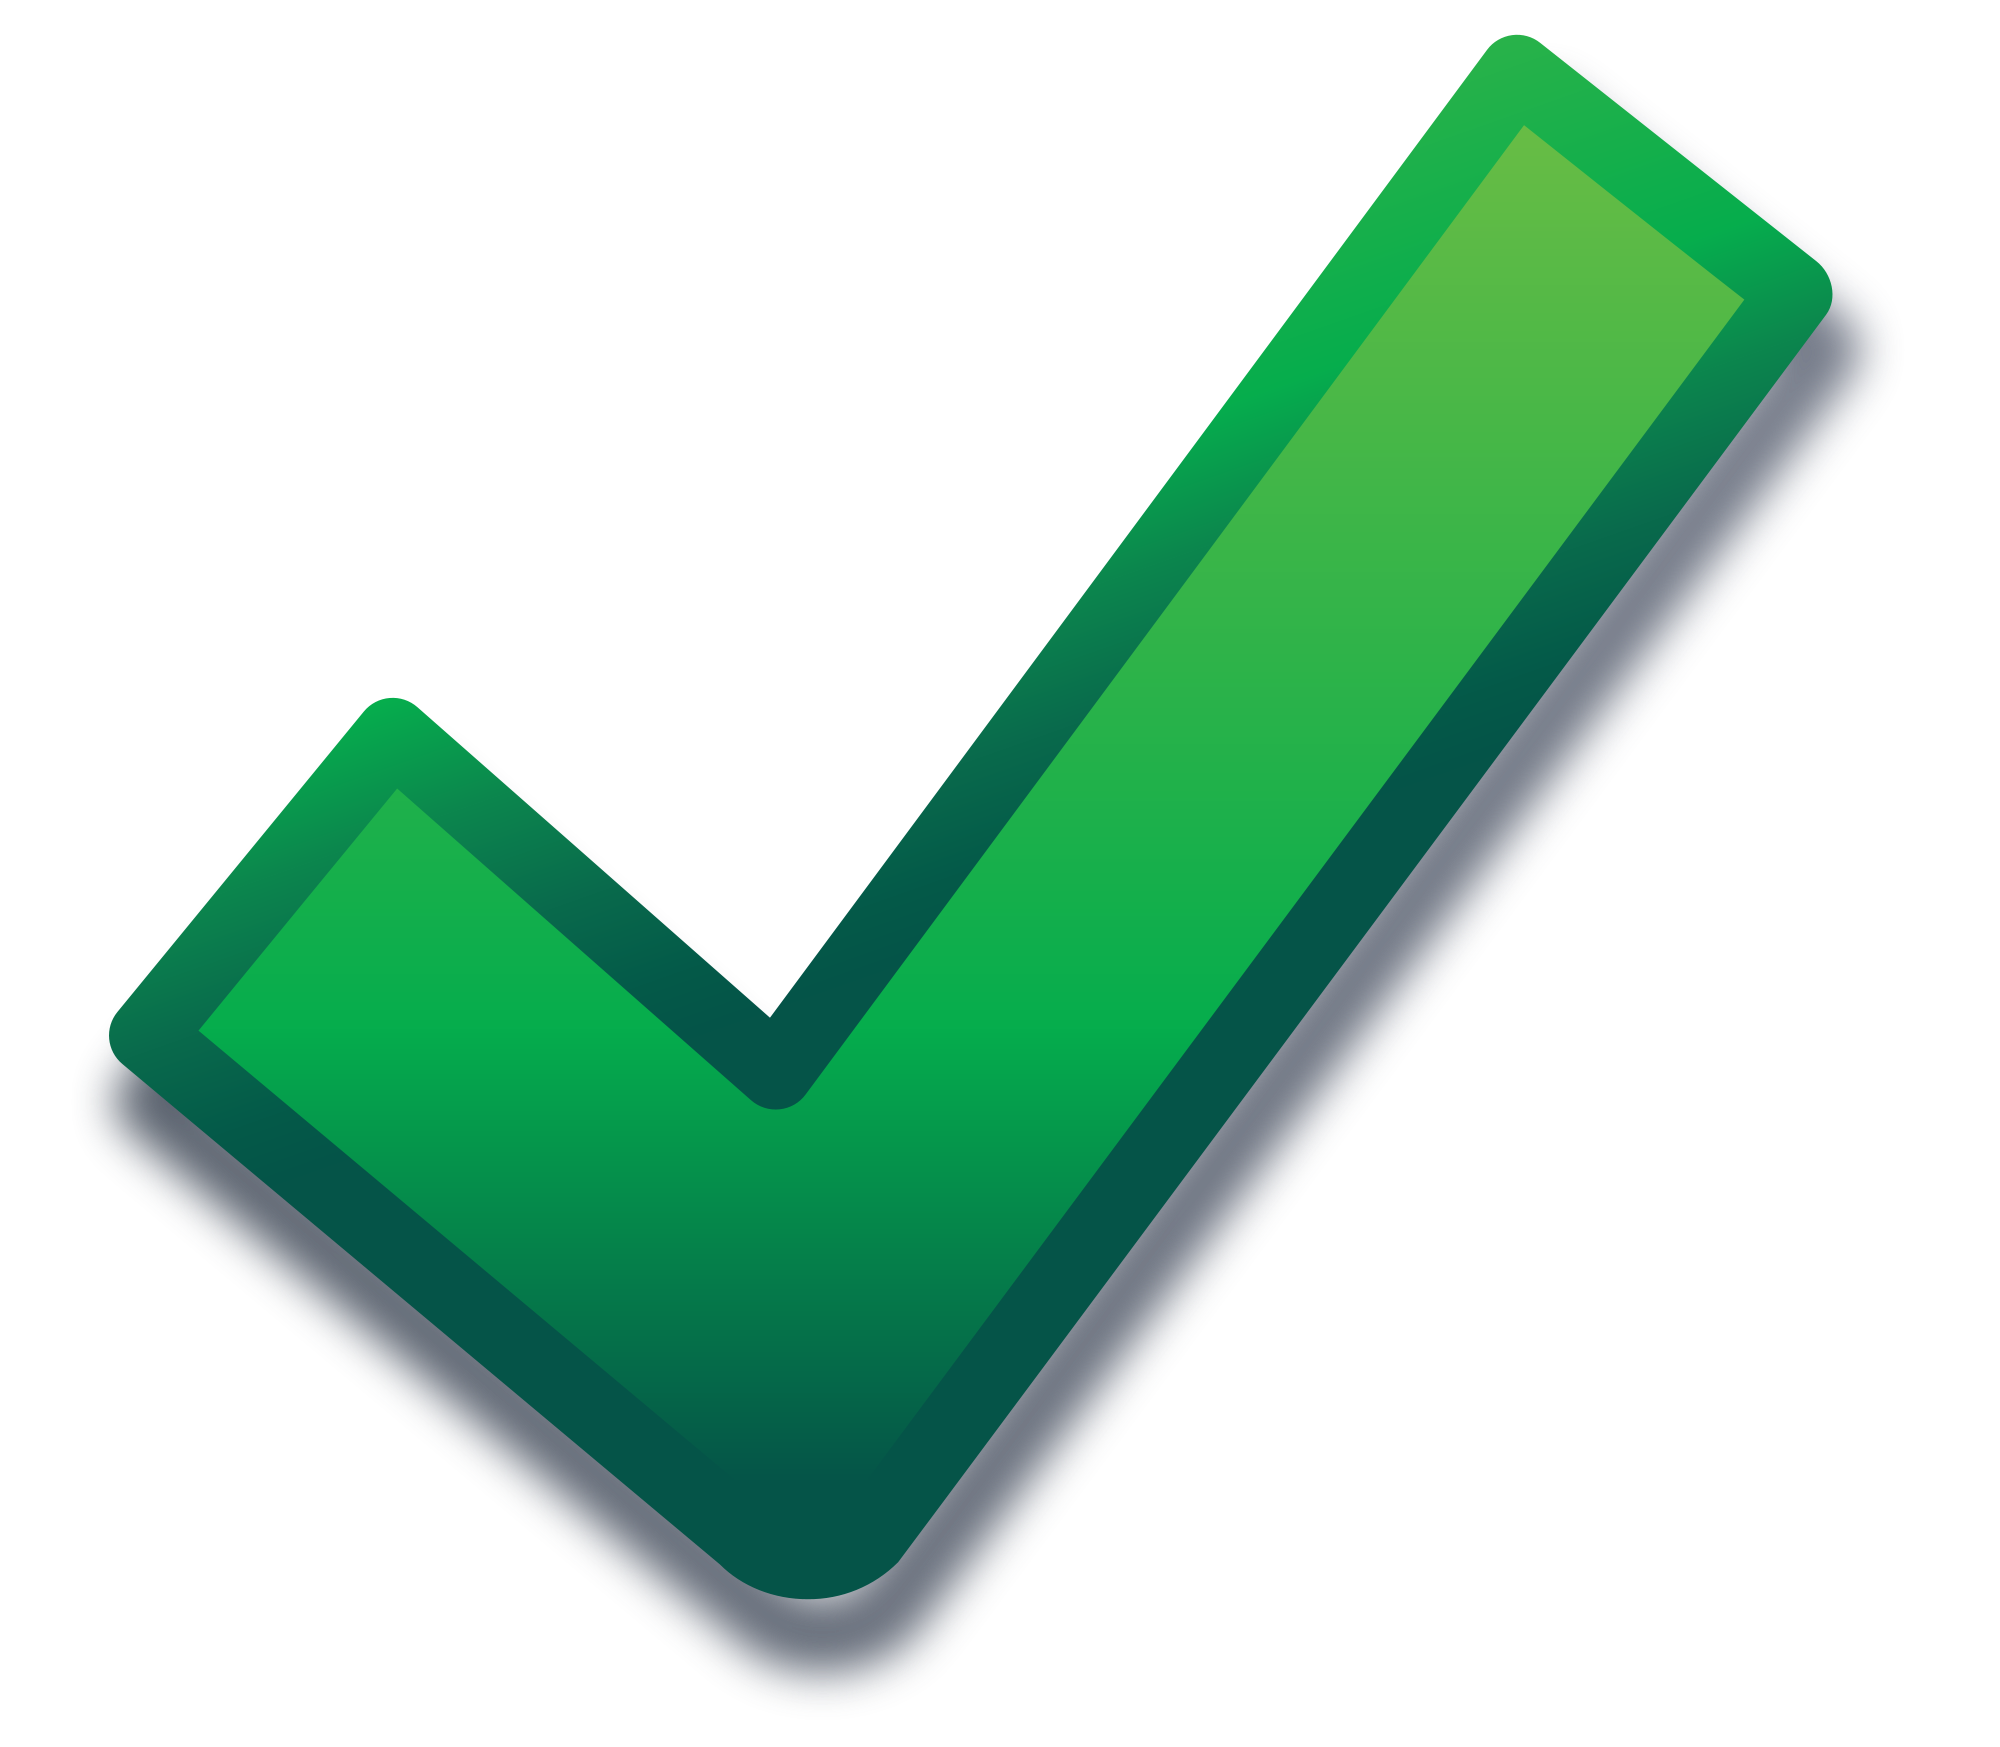 File:Tick Green Modern.svg - Wikimedia Commons - LessonPaths